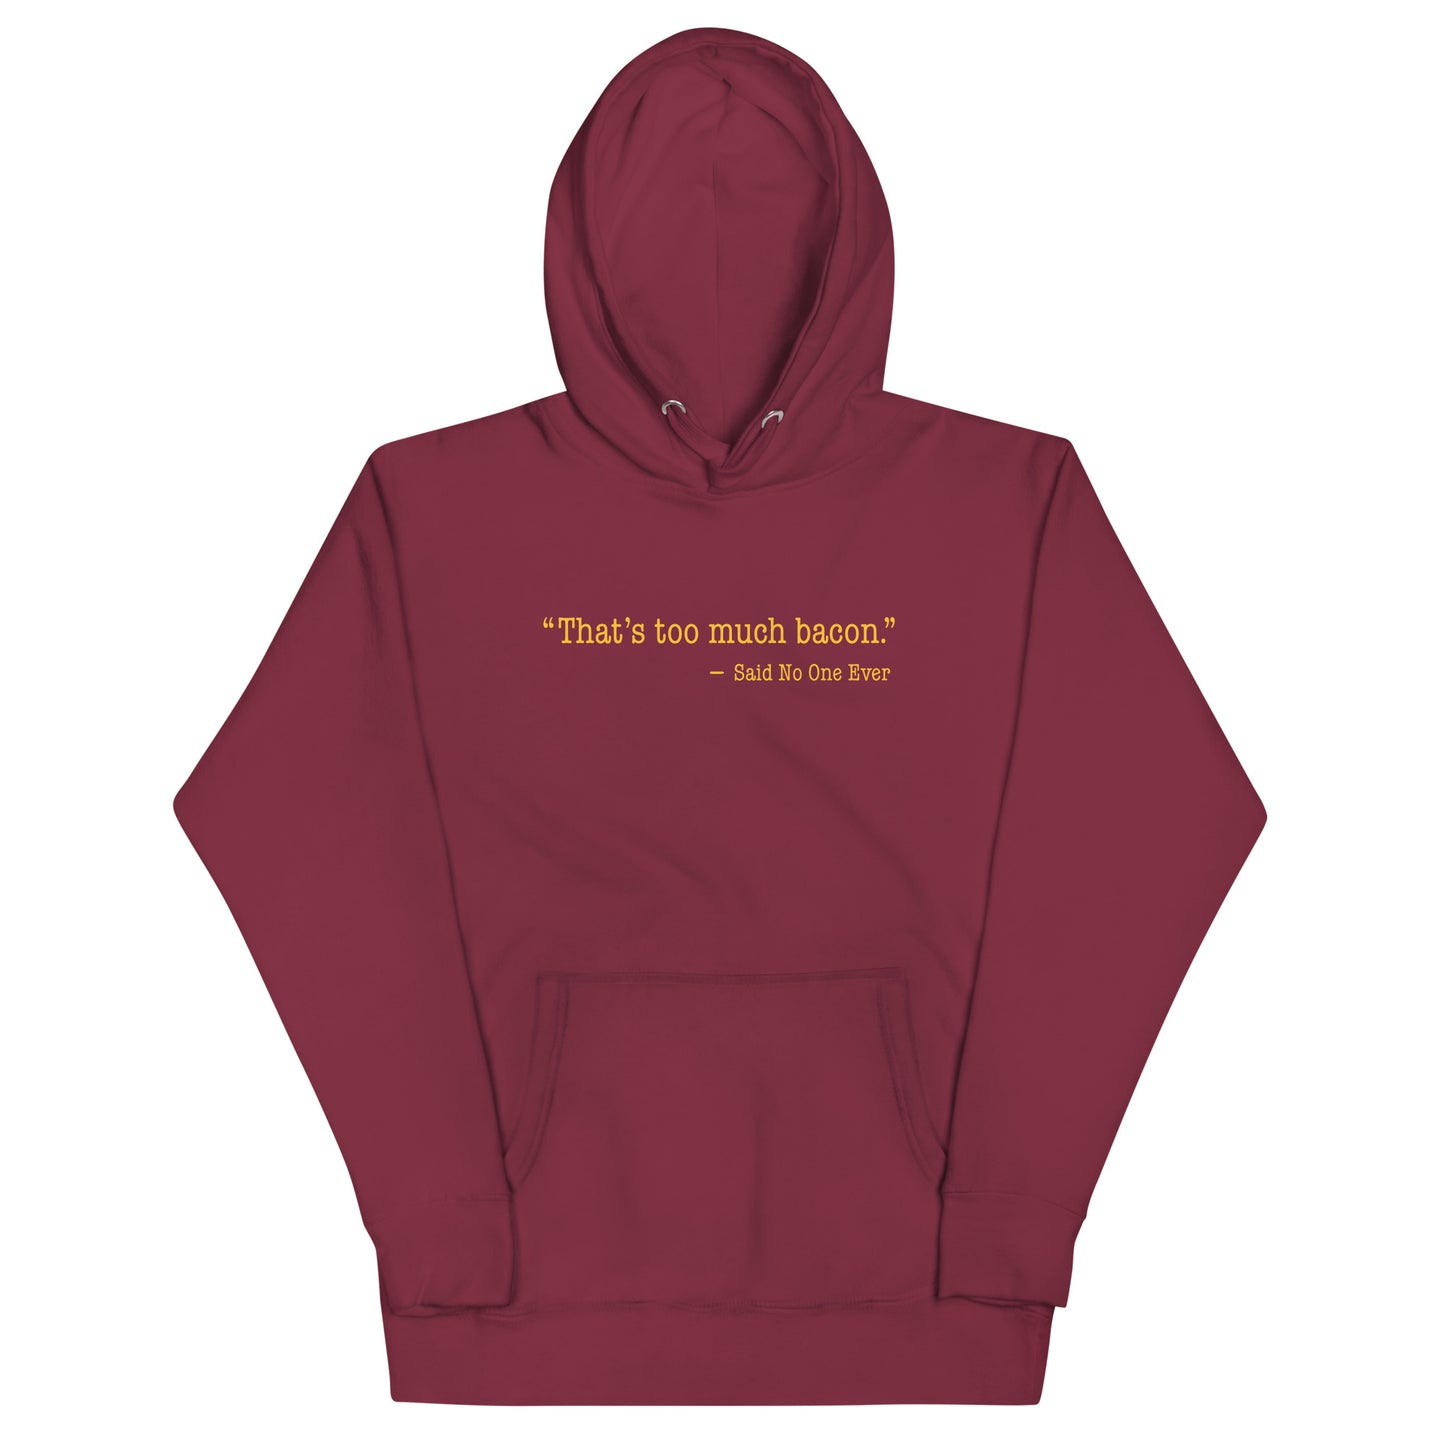 That's Too Much Bacon, Said No One Ever Unisex Hoodie